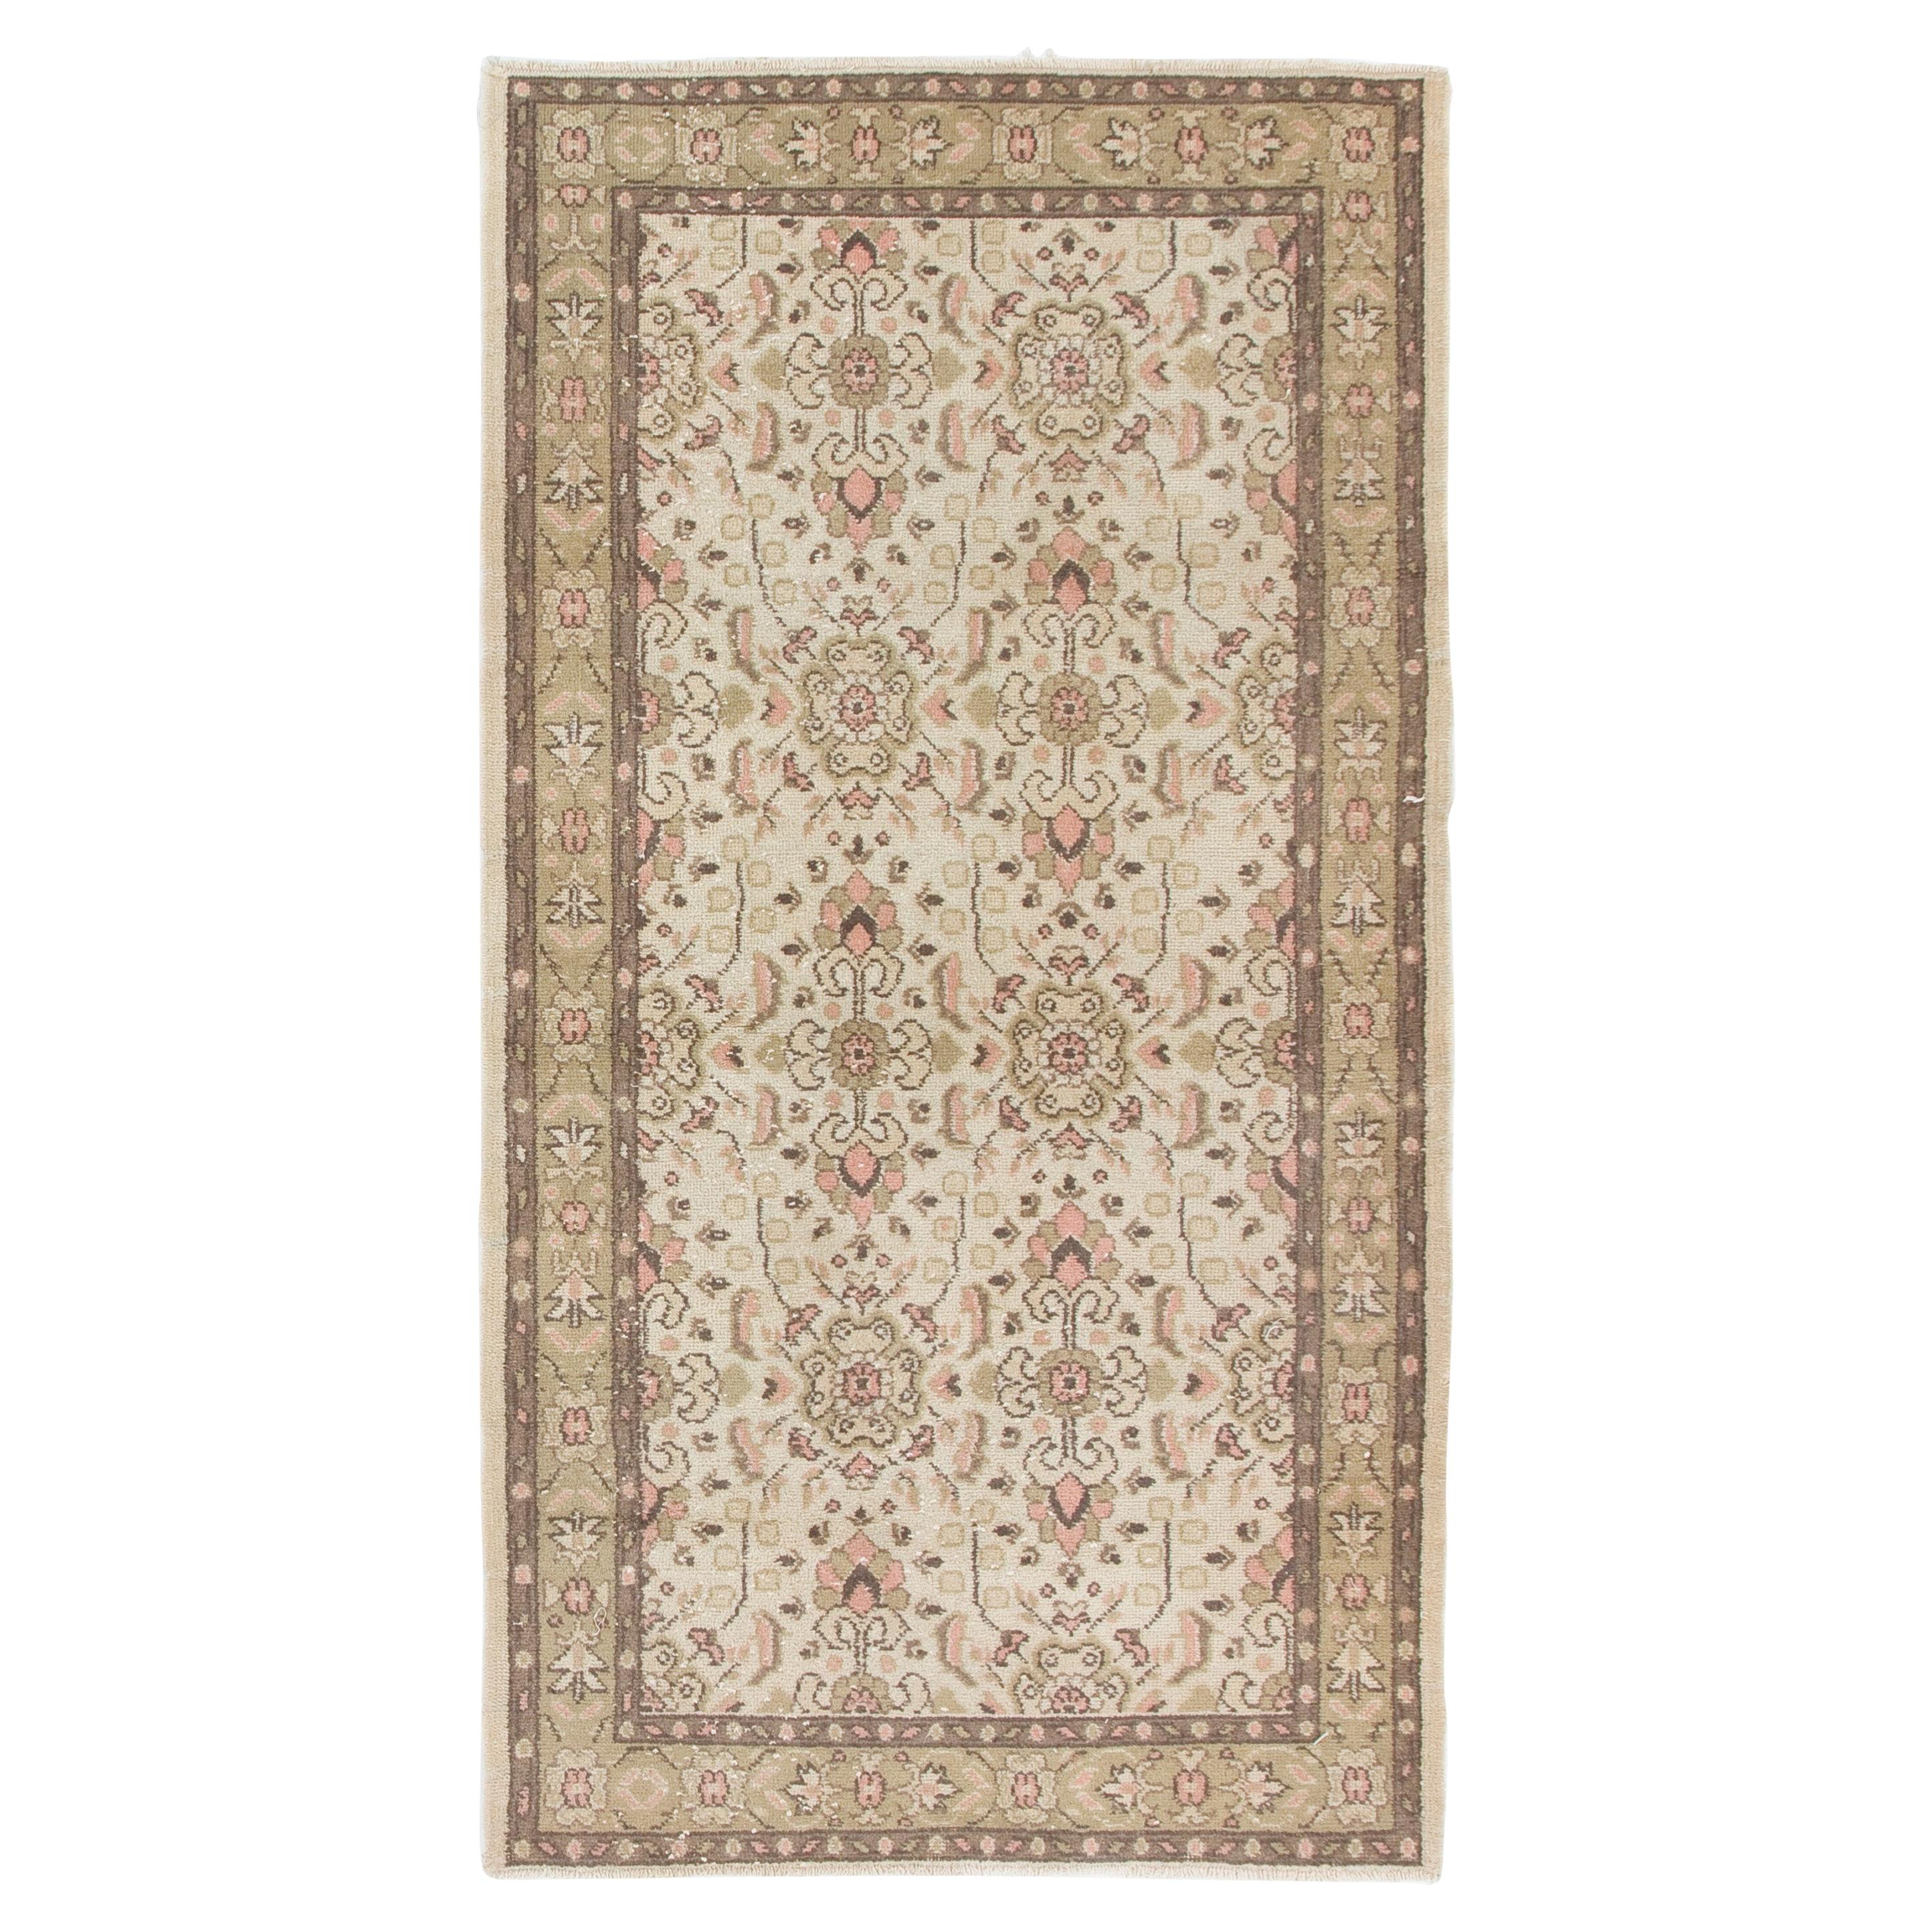 3.7x6.8 Ft Vintage Anatolian Wool Rug in Beige, Faded Green, Soft Pink and Brown